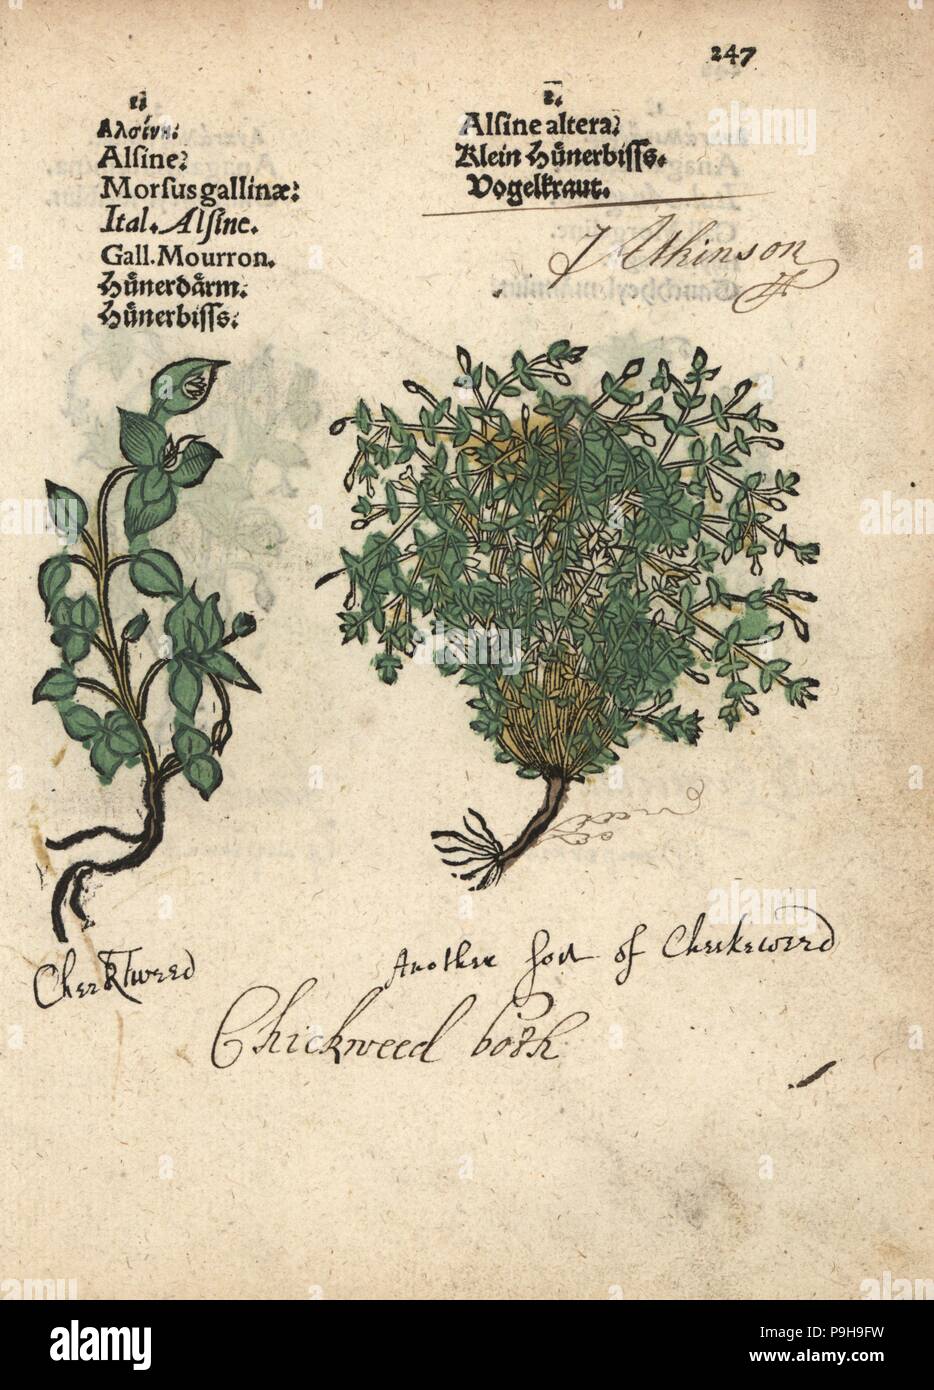 Chickweed varieties, Stellaria media. Handcoloured woodblock engraving of a botanical illustration from Adam Lonicer's Krauterbuch, or Herbal, Frankfurt, 1557. This from a 17th century pirate edition or atlas of illustrations only, with captions in Latin, Greek, French, Italian, German, and in English manuscript. Stock Photo